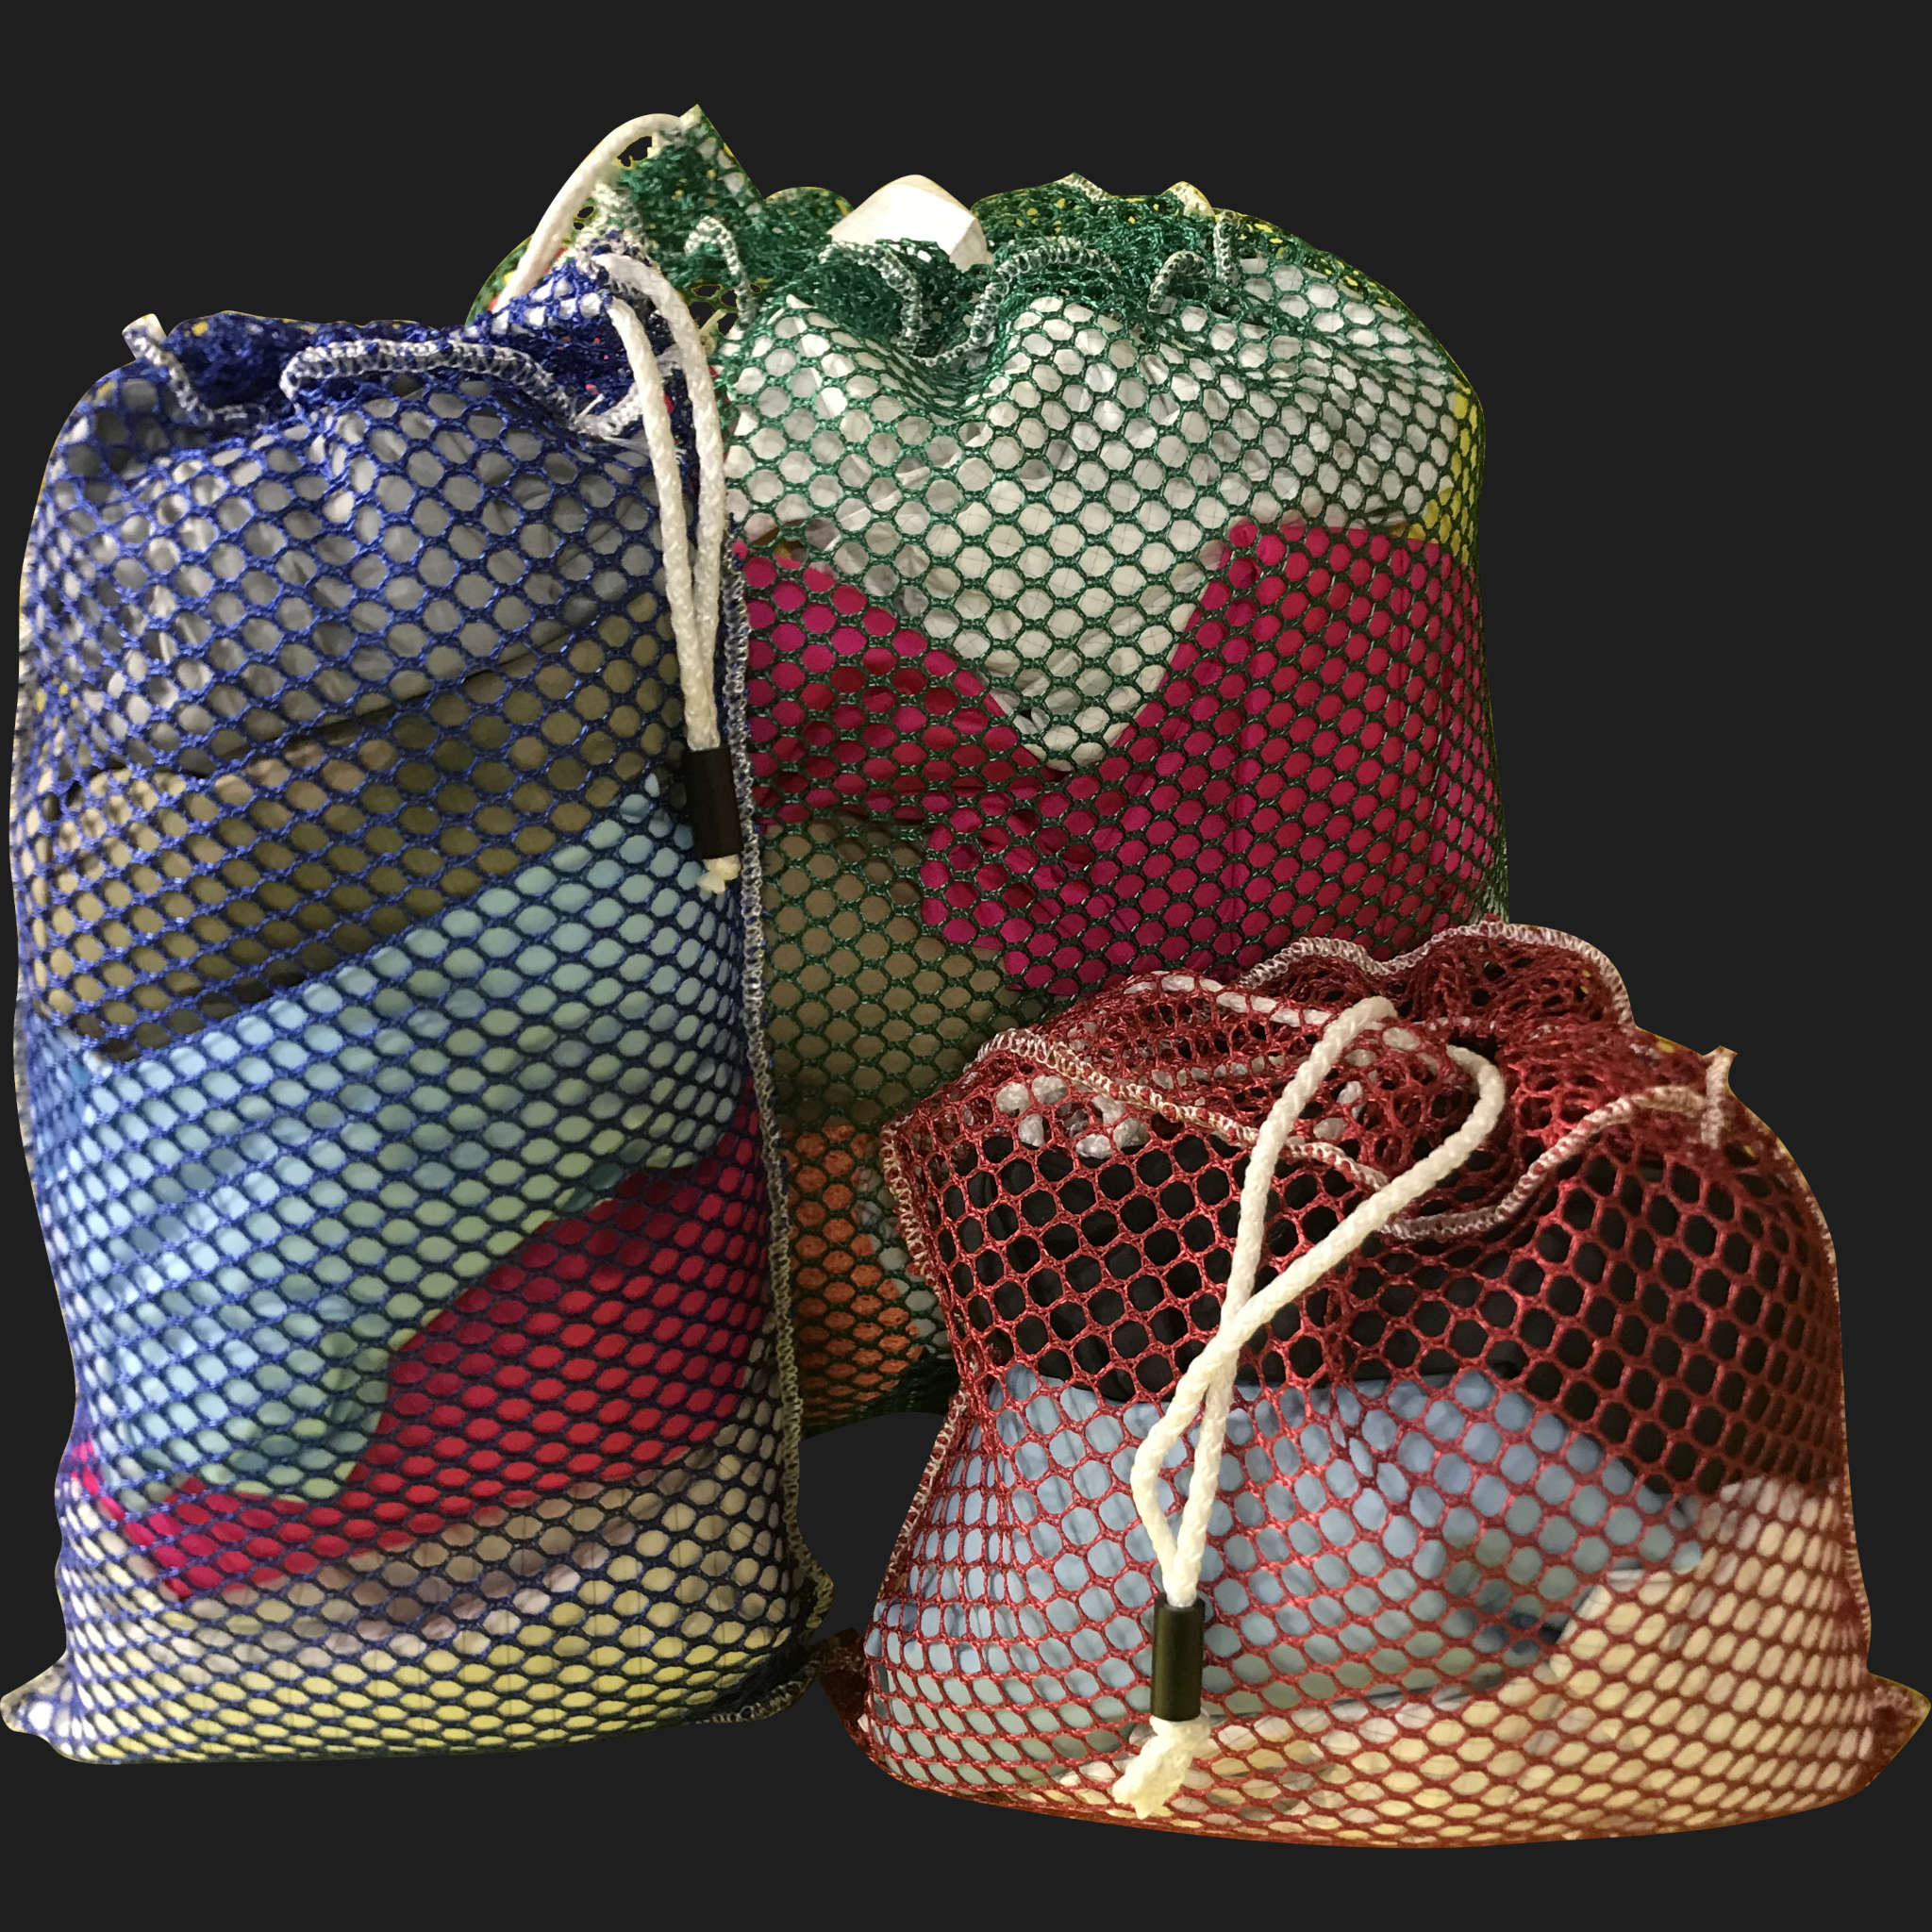 14" x 28" Customized Mesh-Net-Laundry Bags Heavy Duty with Cord and barrellock closure